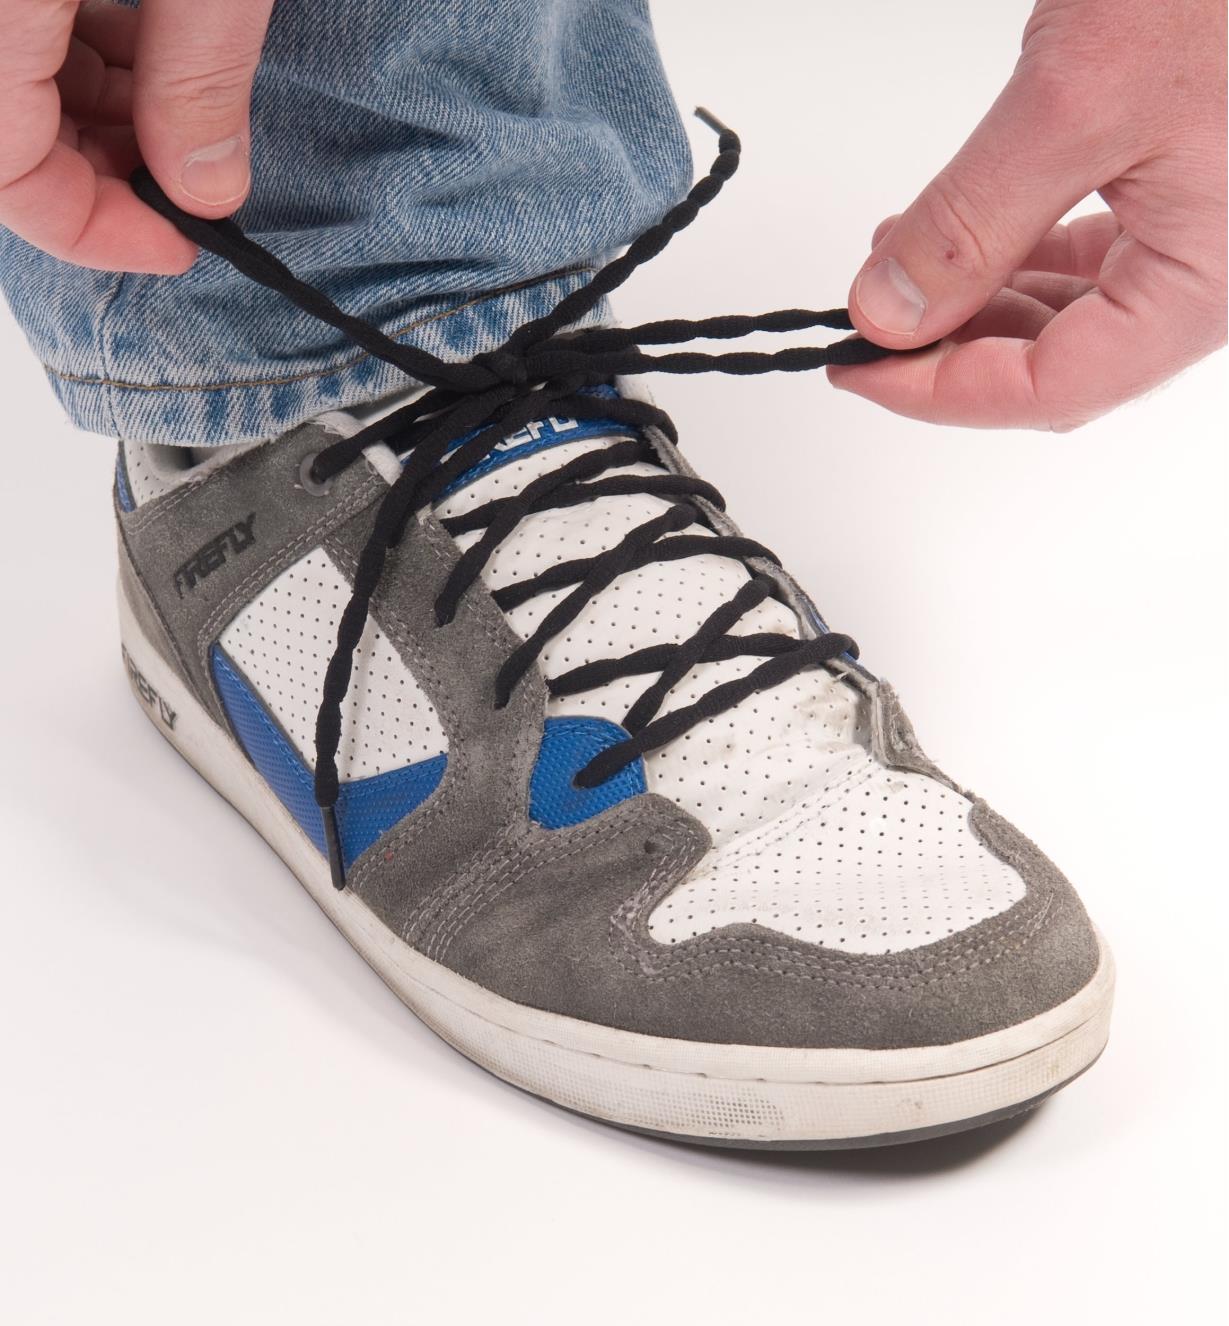 shoelaces for new balance sneakers